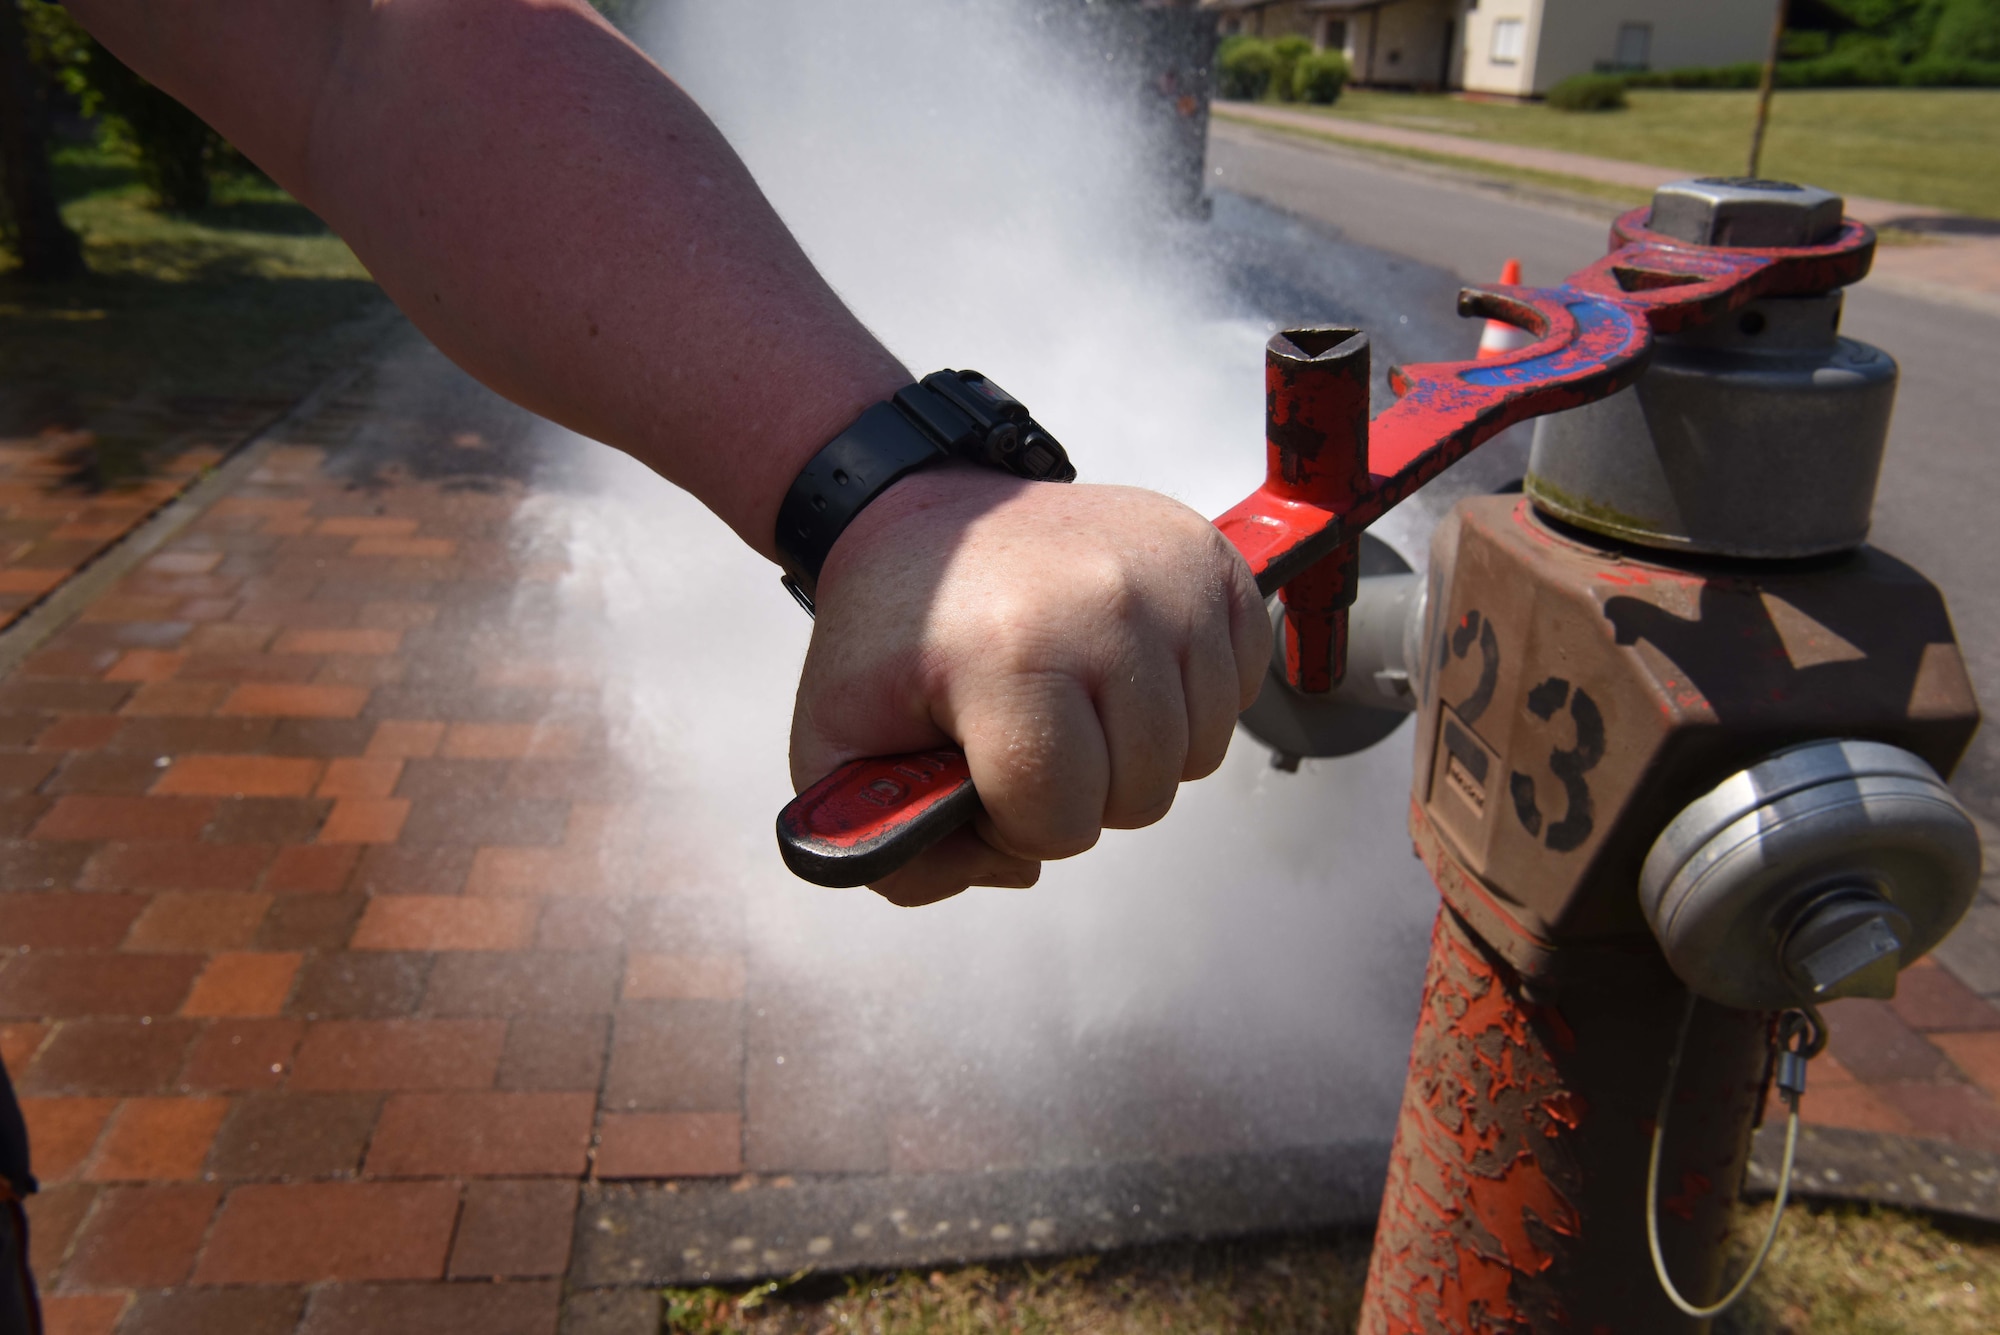 Thomas Bredel, water-plant mechanic, 786th CES, turns the wrench to test the water pressure of a fire hydrant on Ramstein Air Base, Germany, May, 9, 2018. Bredel has worked for the water plant for 5 years and likes that this part of his job allows the fire department to be prepared in case of emergencies.